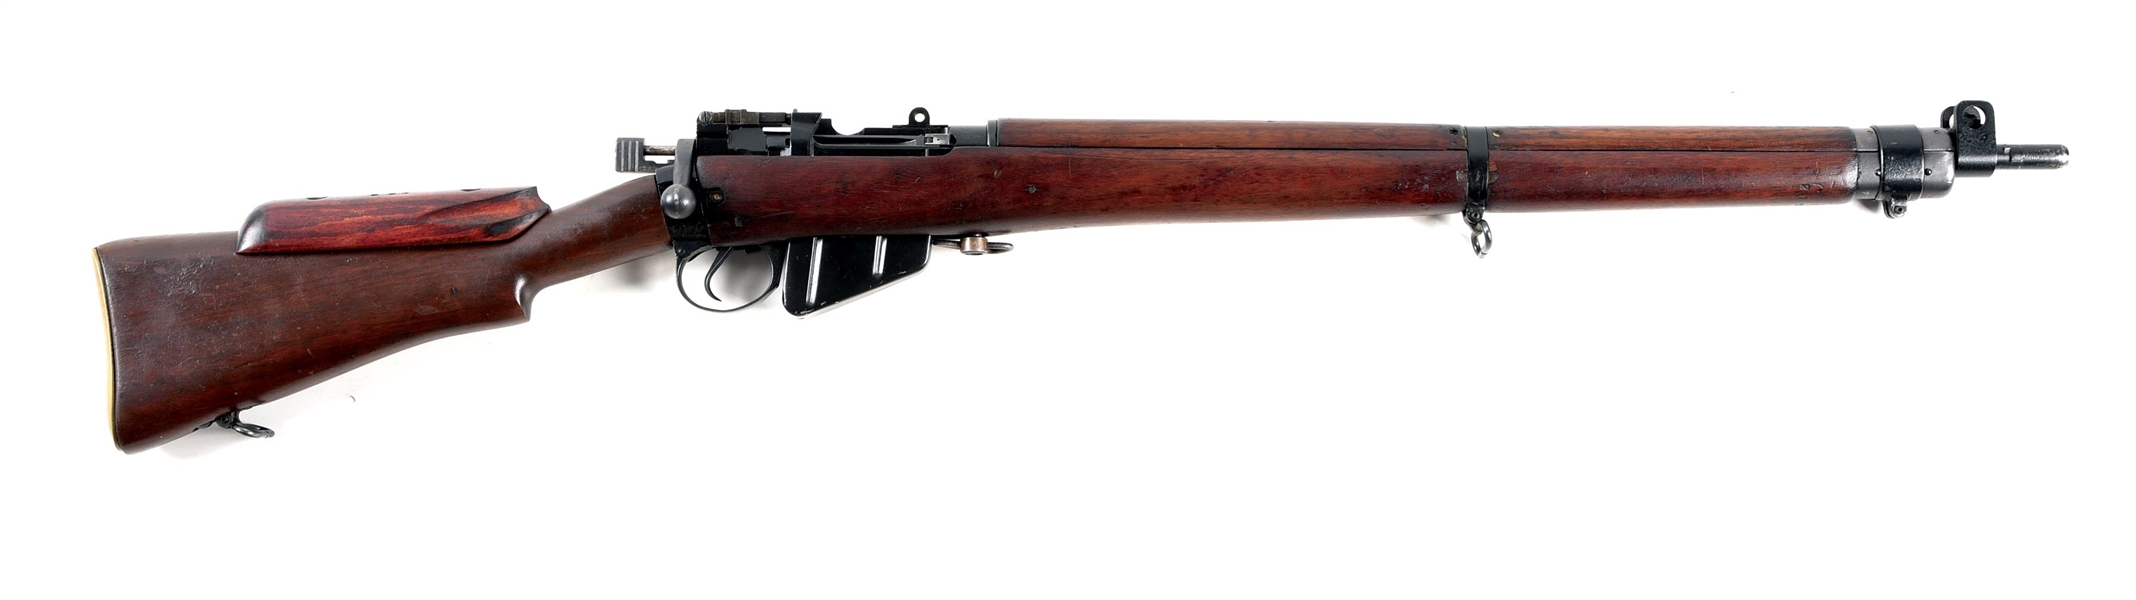 (C) ENFIELD NO. 4 MK 1 T BOLT ACTION SNIPER RIFLE WITH TRANSIT CHEST, CONVERTED BY HOLLAND AND HOLLAND.